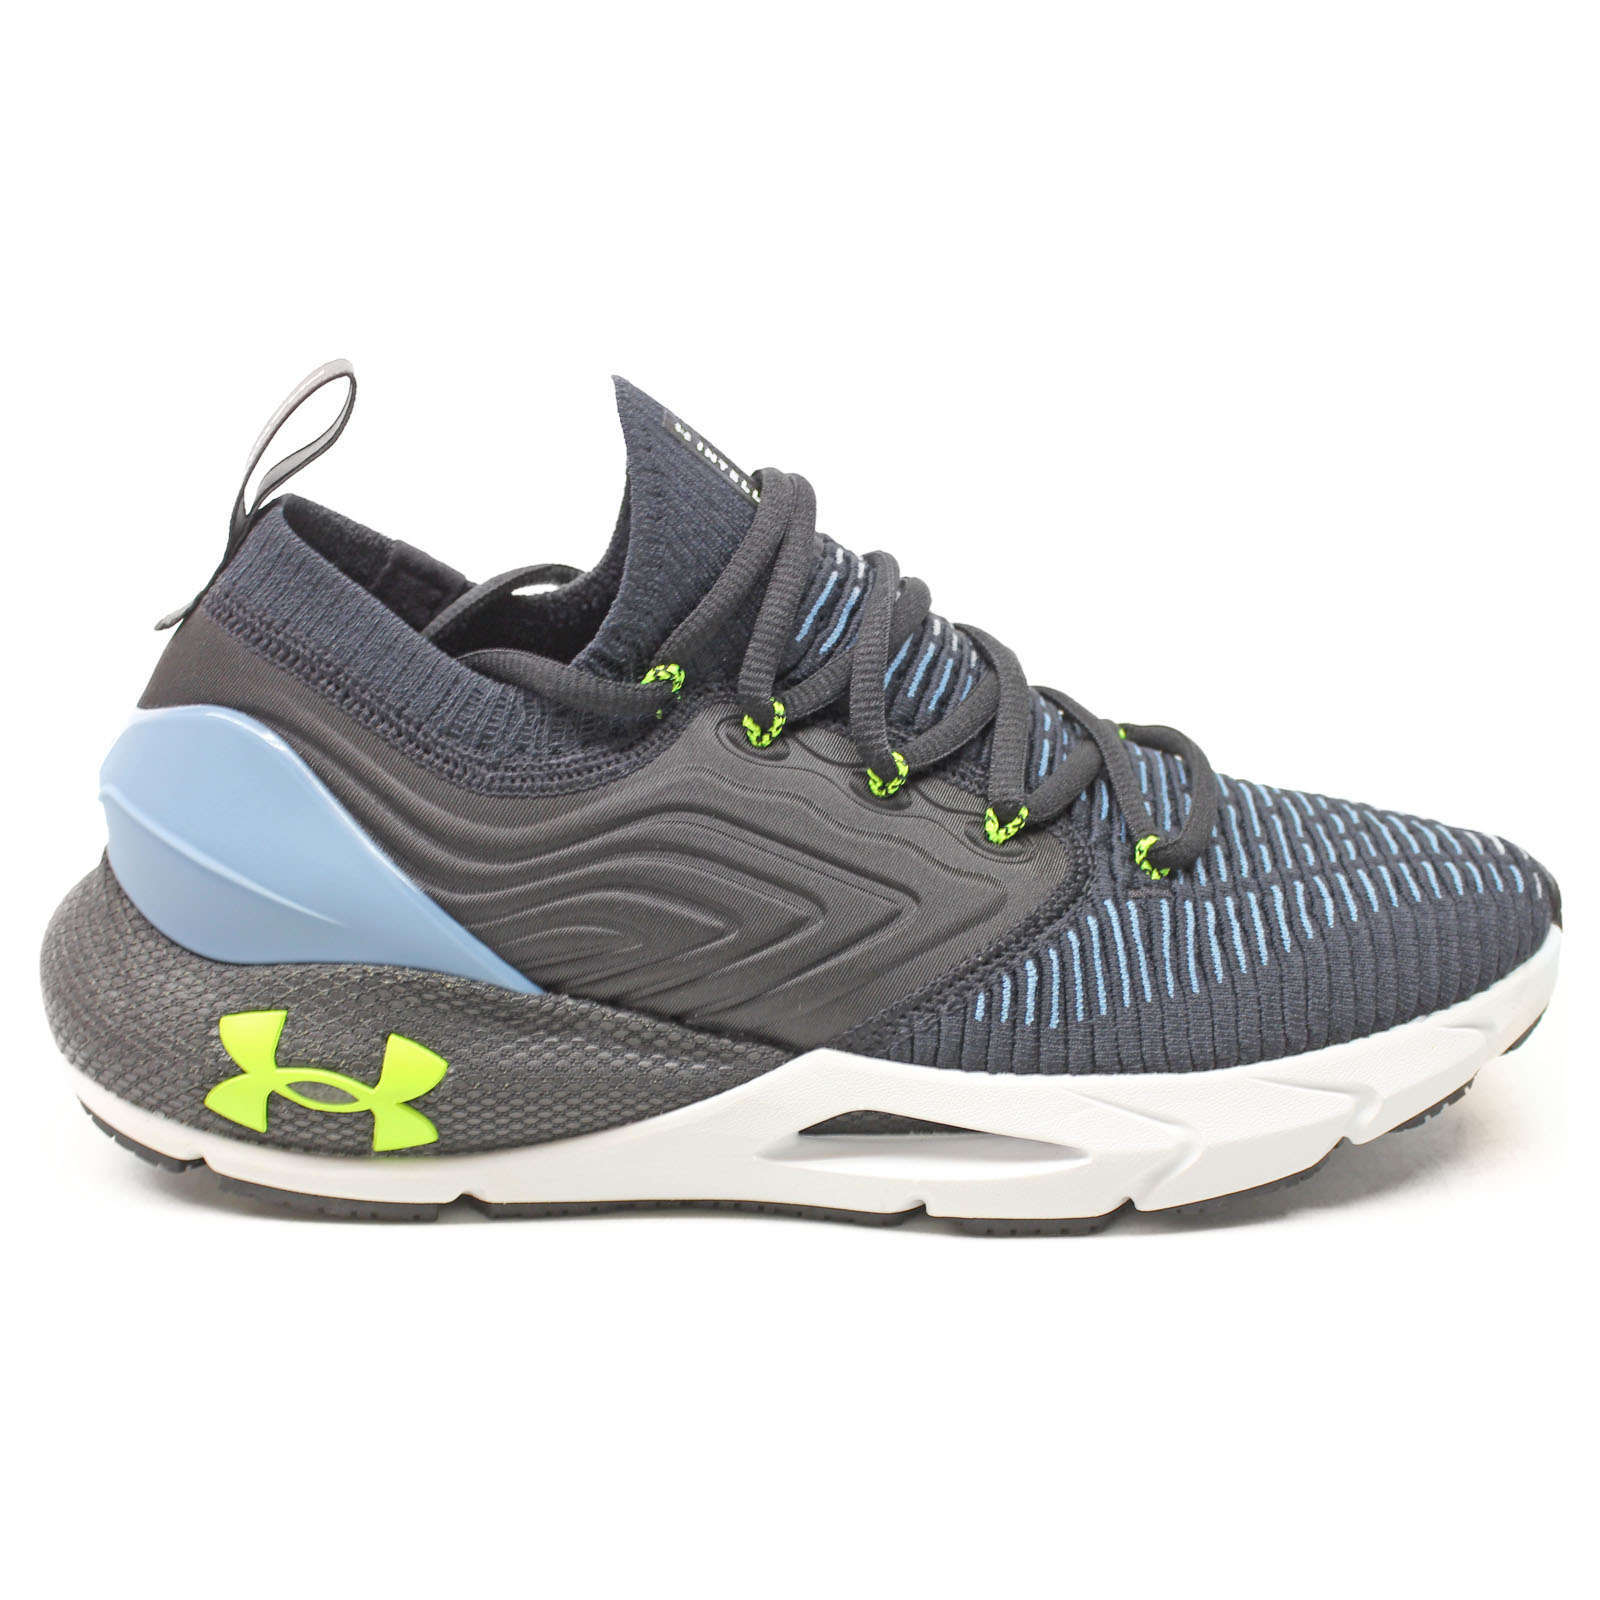 Under Armour HOVR Phantom 2 INKNT Synthetic Textile Men's Low-Top Trainers#color_black black blue